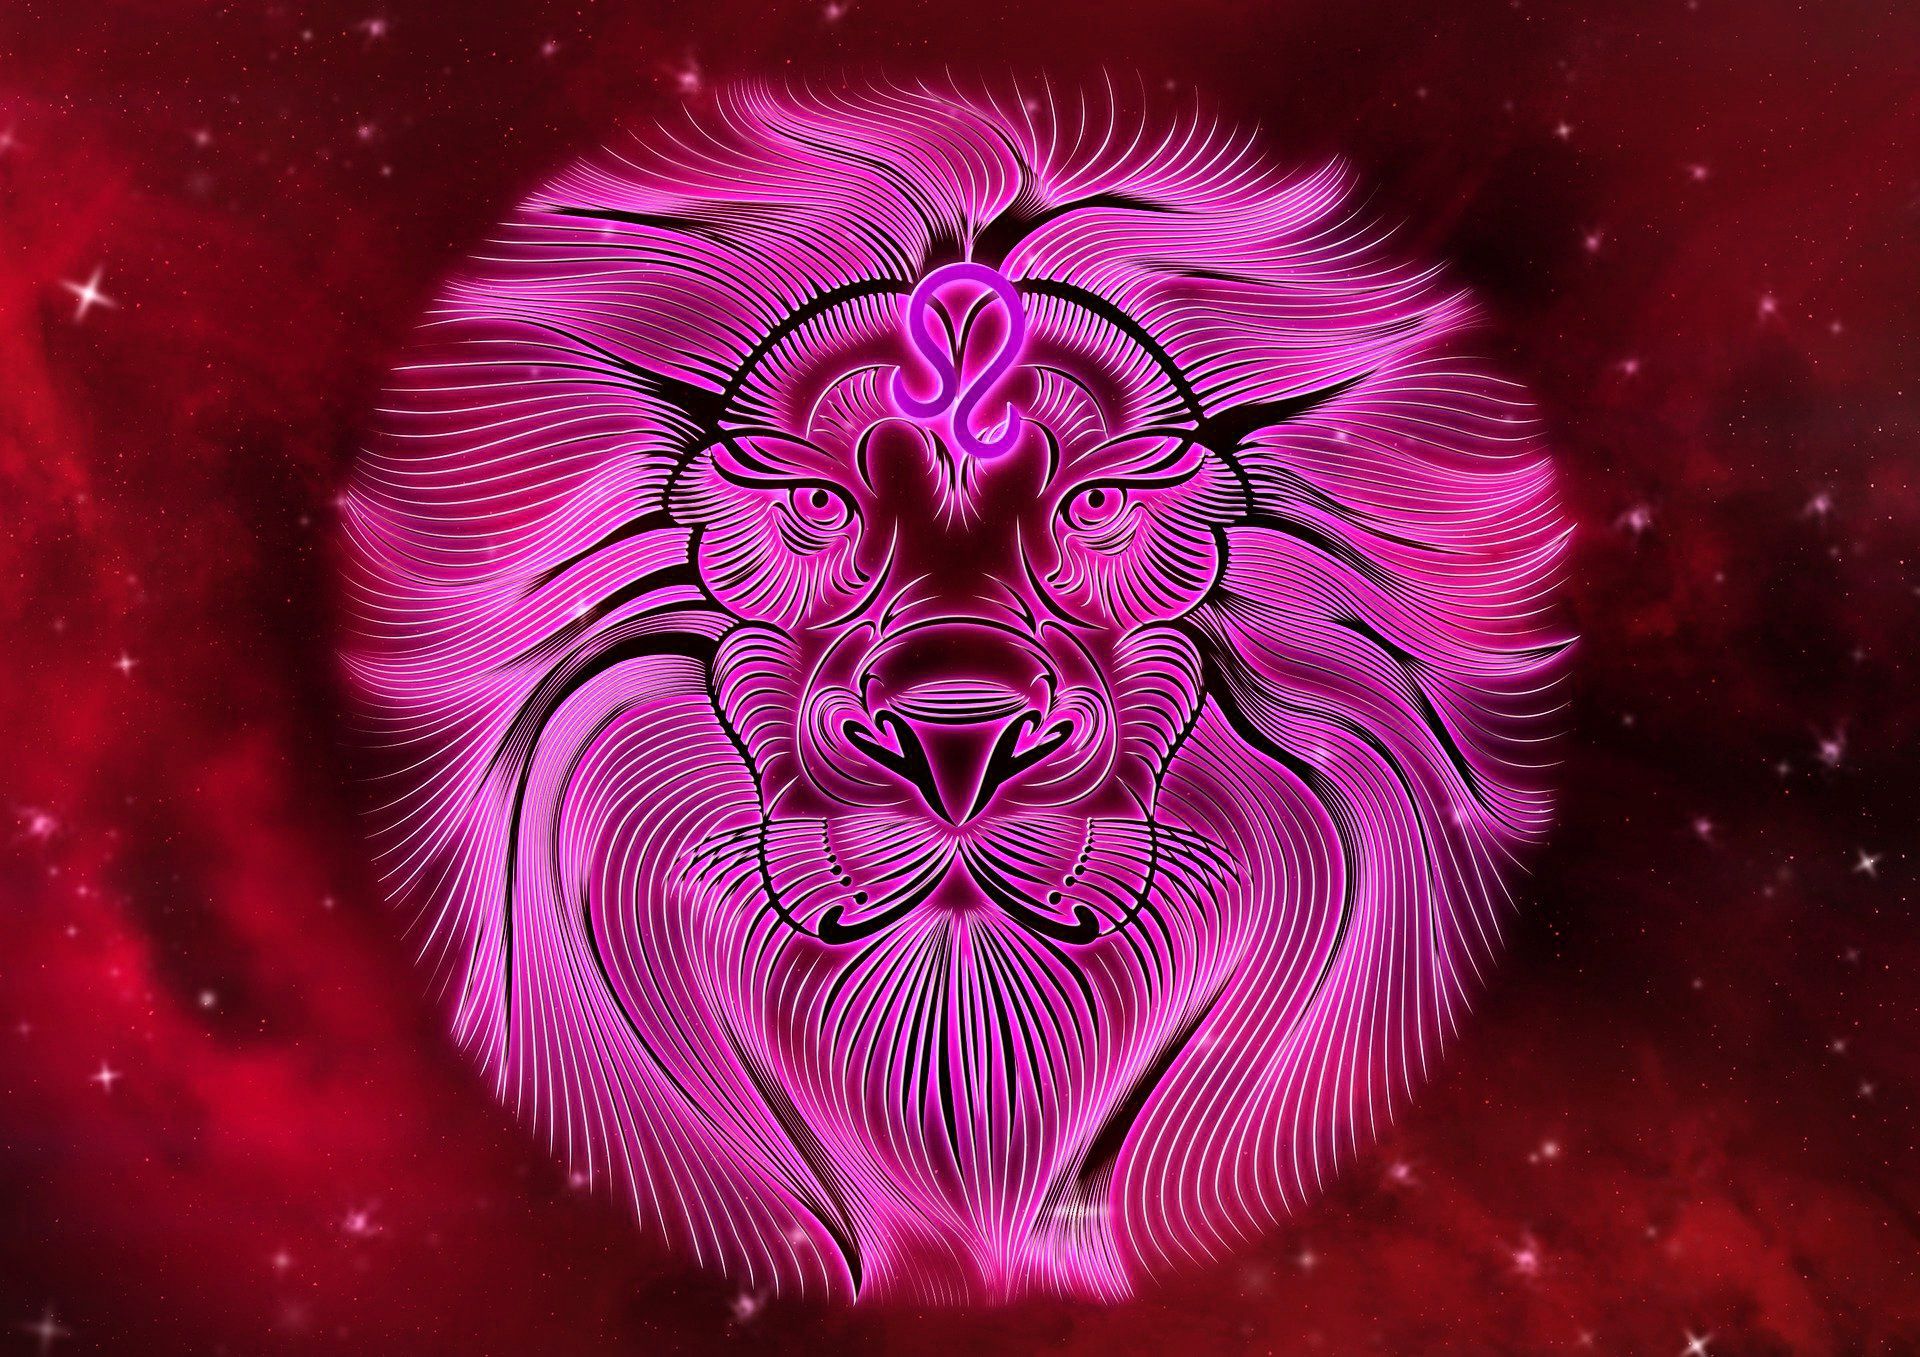 The Leo Sign - Characteristics, Compatibility, and More - Leo, lion